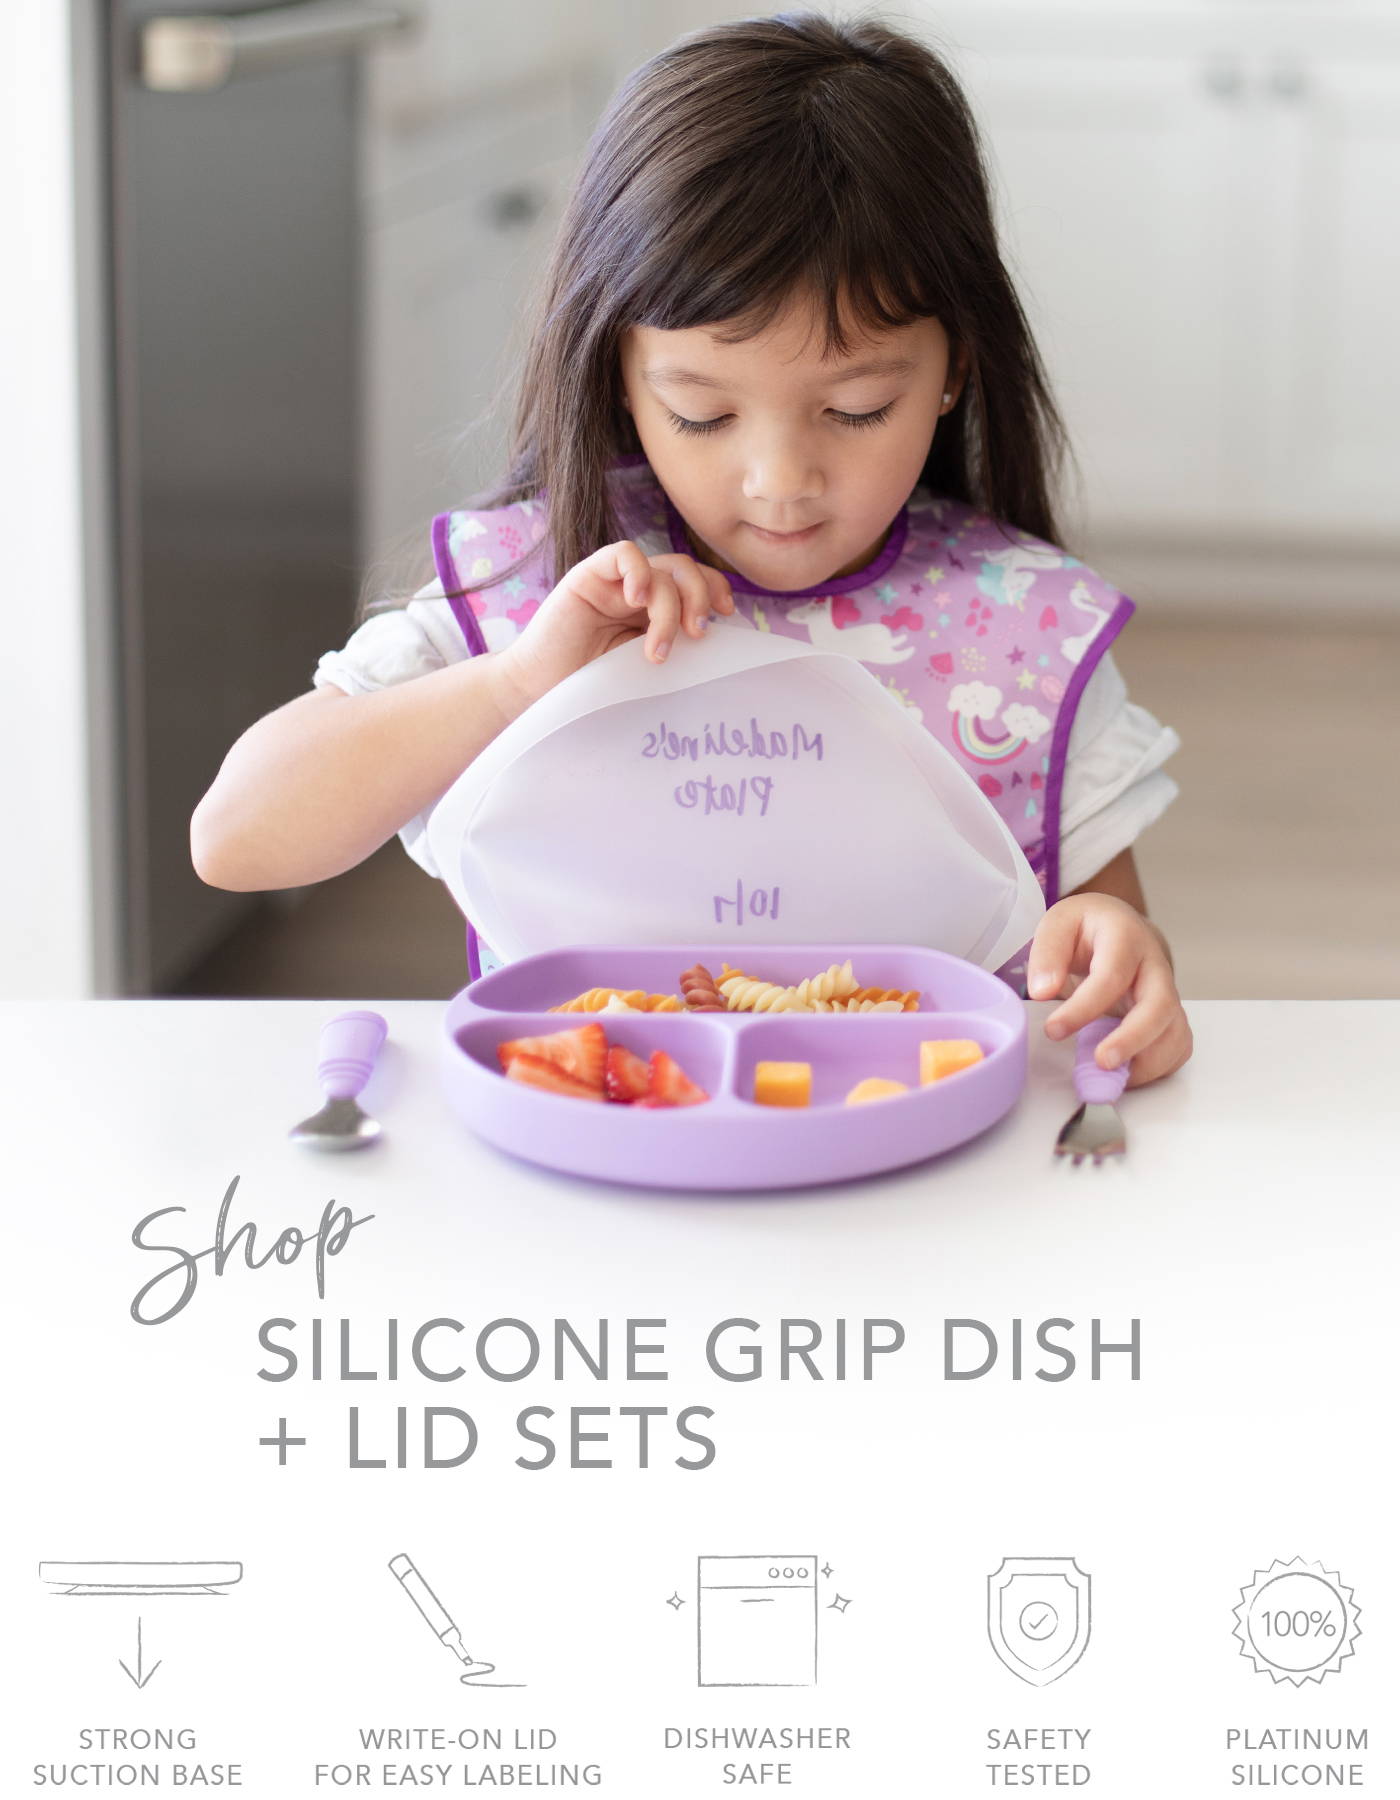 shop silicone grip dish and lid sets